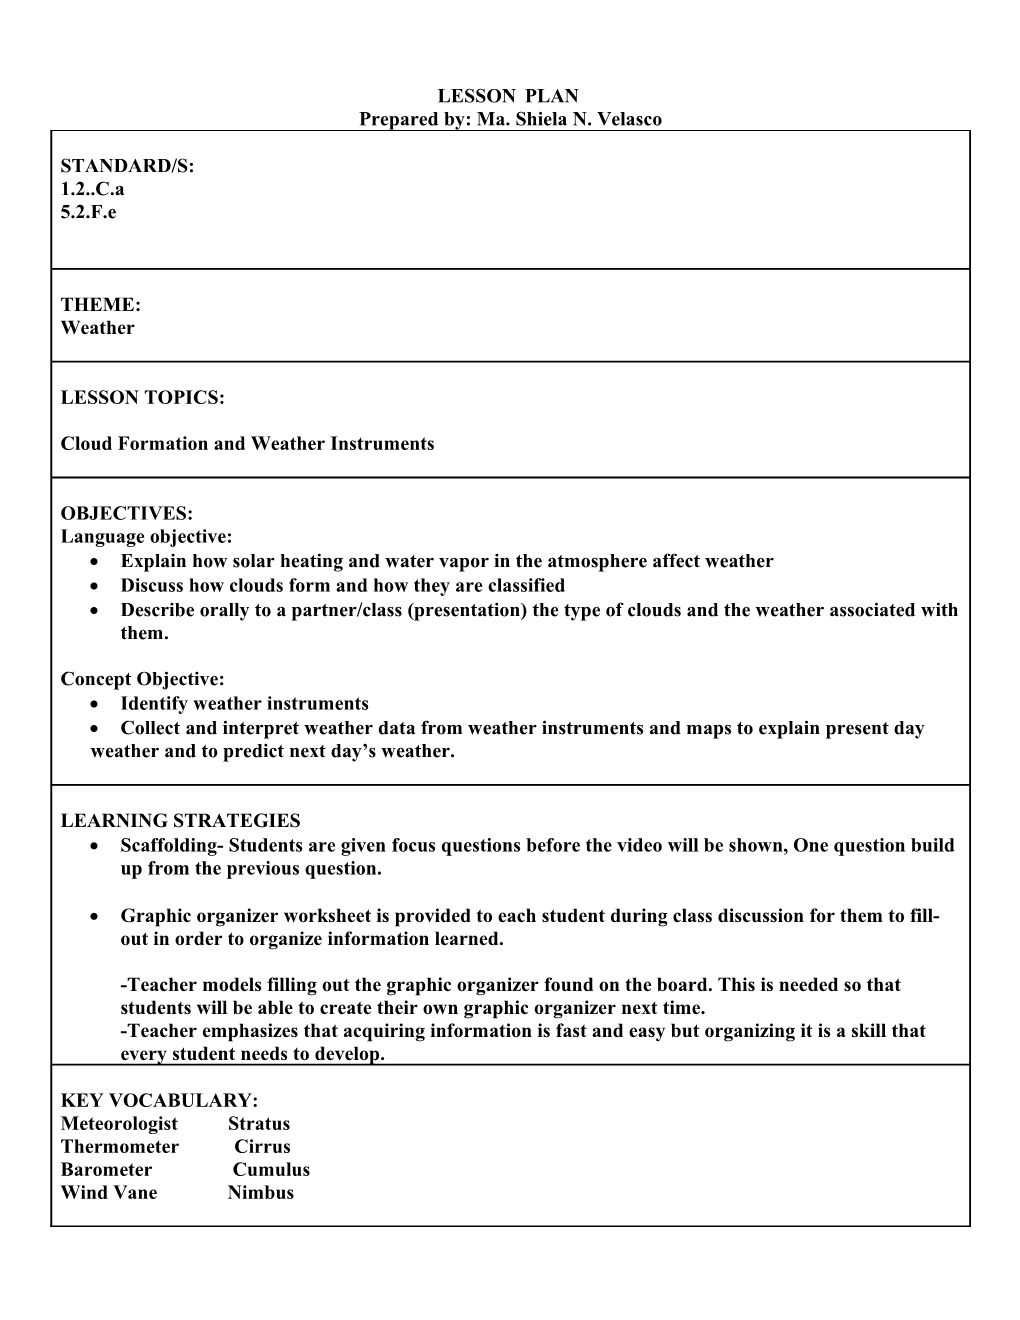 SIOP Lesson Plan Template 2